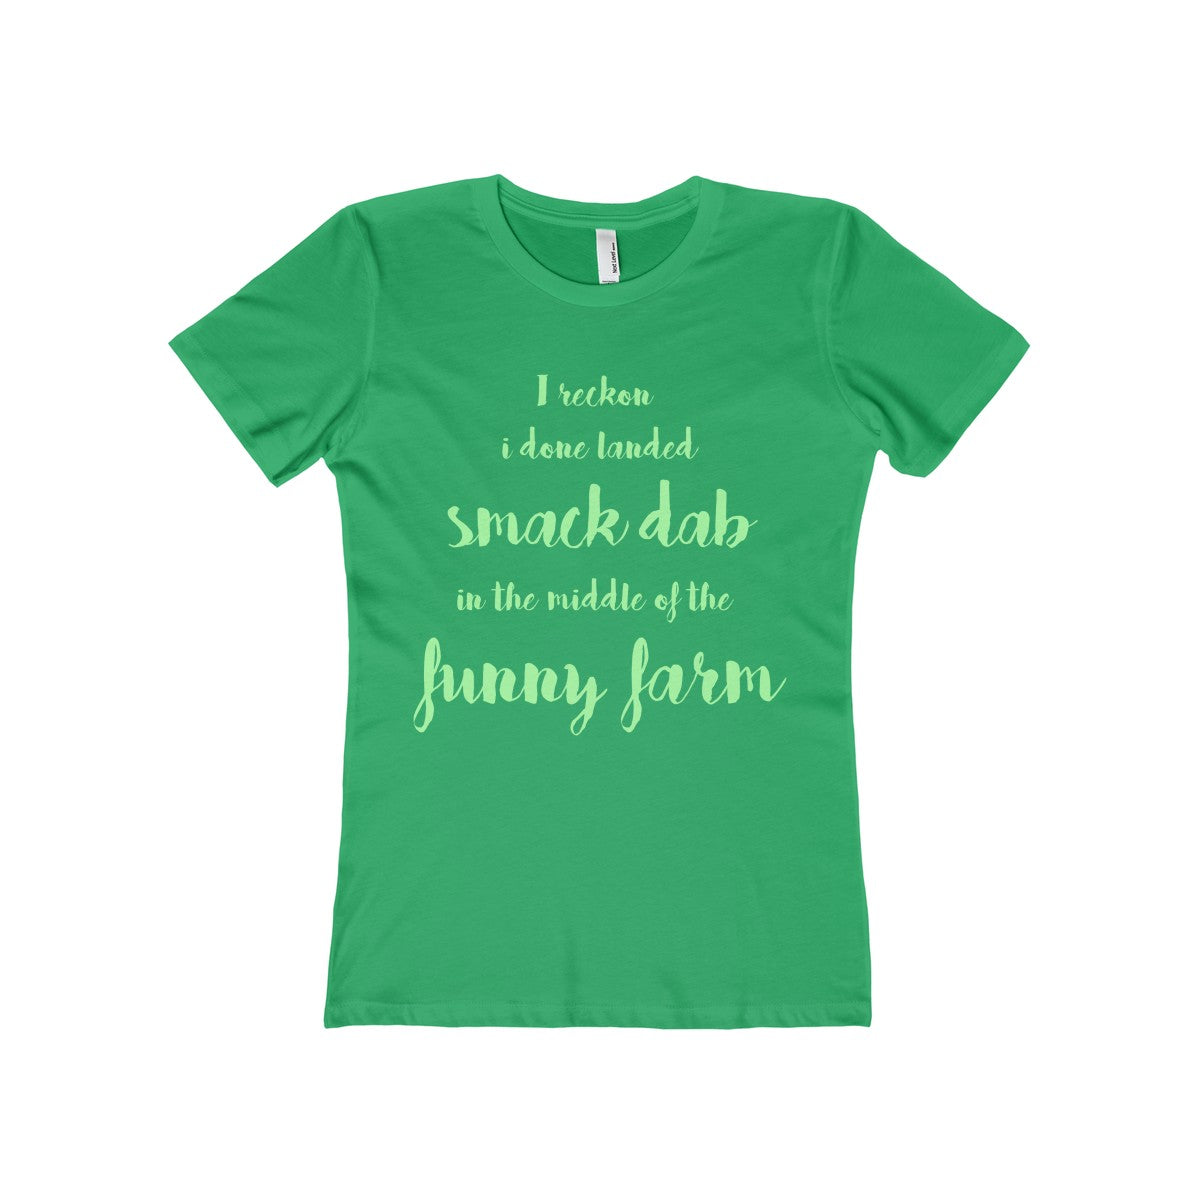 I Reckon I Done Landed Smack Dab in the Middle of the Funny Farm Women's The Boyfriend Tee-T-Shirt-PureDesignTees